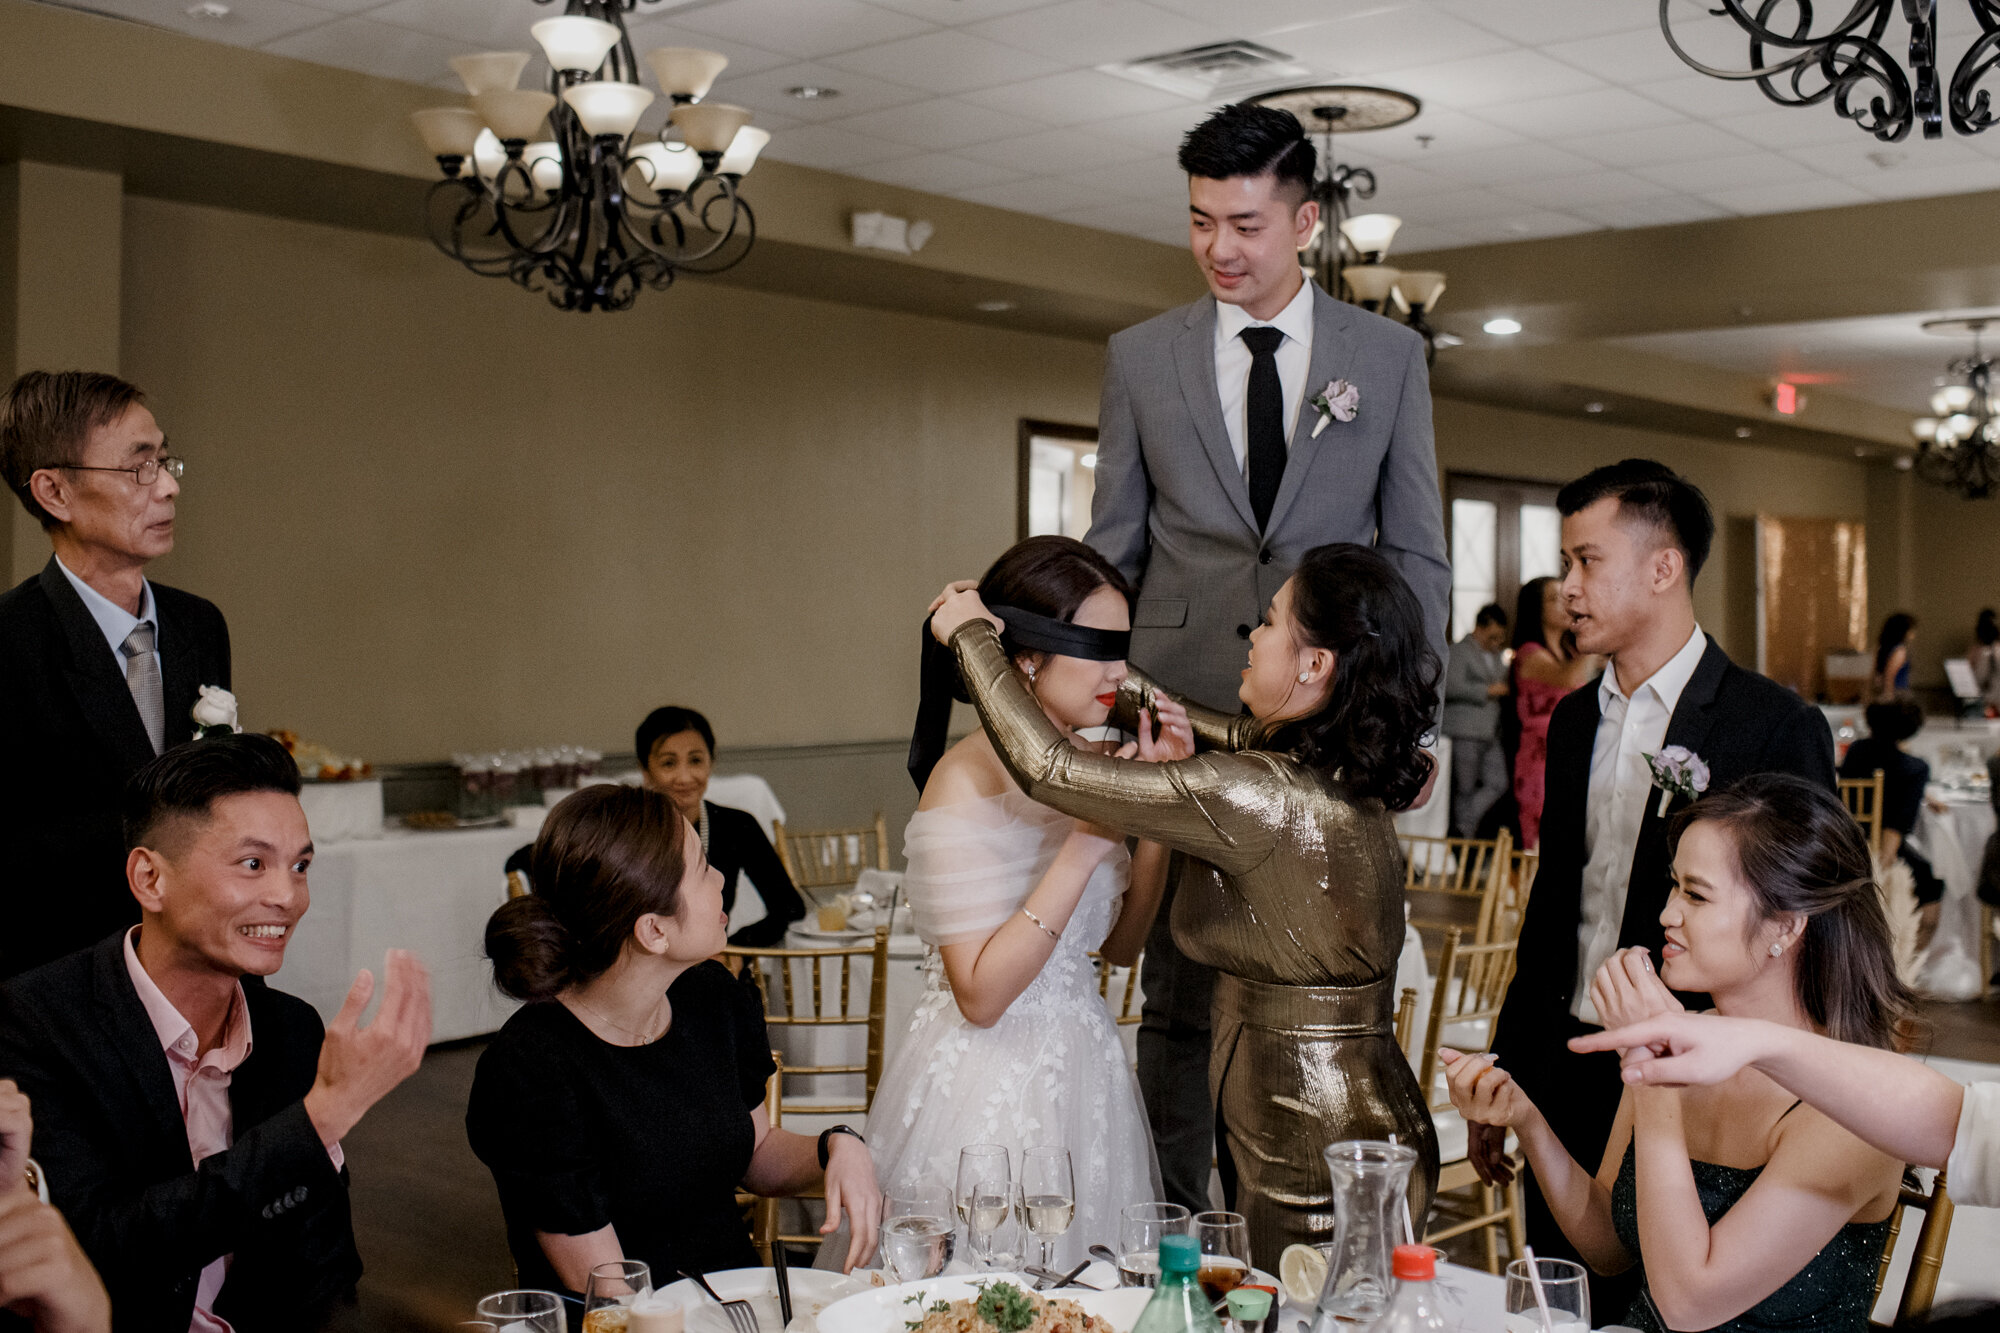 Bride and groom playing games with guests. Urban Elegant East Asian Wedding at Chateau De L’Amour